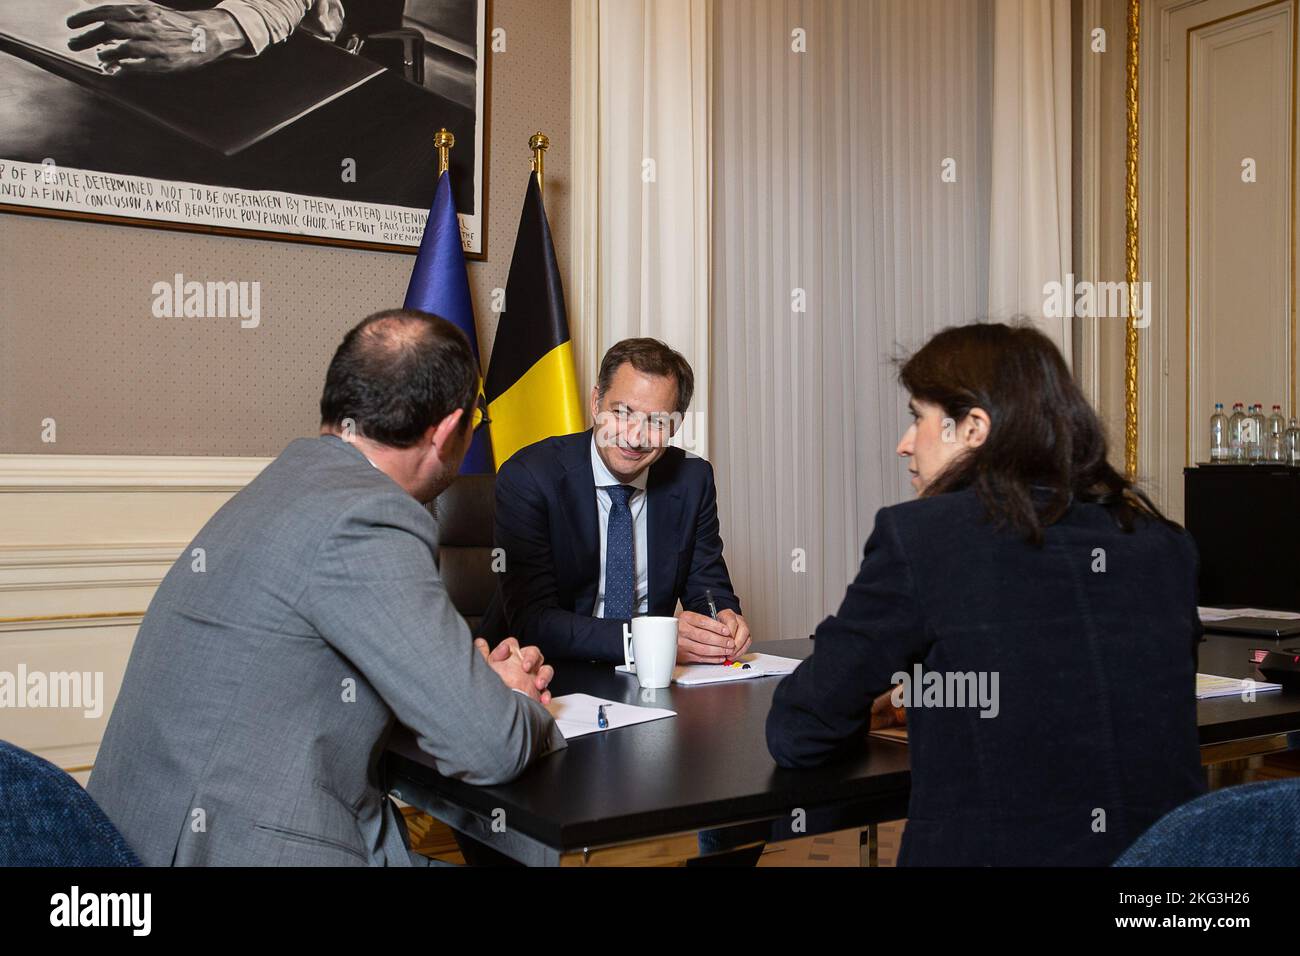 Justice Minister Vincent Van Quickenborne, Prime Minister Alexander De Croo and new State Secretary for Budget Alexia Bertrand pictured during a meeting between the new State Secretary for Budget, the Prime Minister and Minister of Justice, at the offices of the Prime Minister, in Brussels, Monday 21 November 2022. Following the resignation of De Bleeker (Open VLD) due to budget errors, Bertrand was sworn in as Belgium's new Secretary of State for Budget and Consumer Protection on Friday. The 43-year-old Bertrand is the daughter of Luc Bertrand, CEO of the holding company Ackermans & van Haare Stock Photo